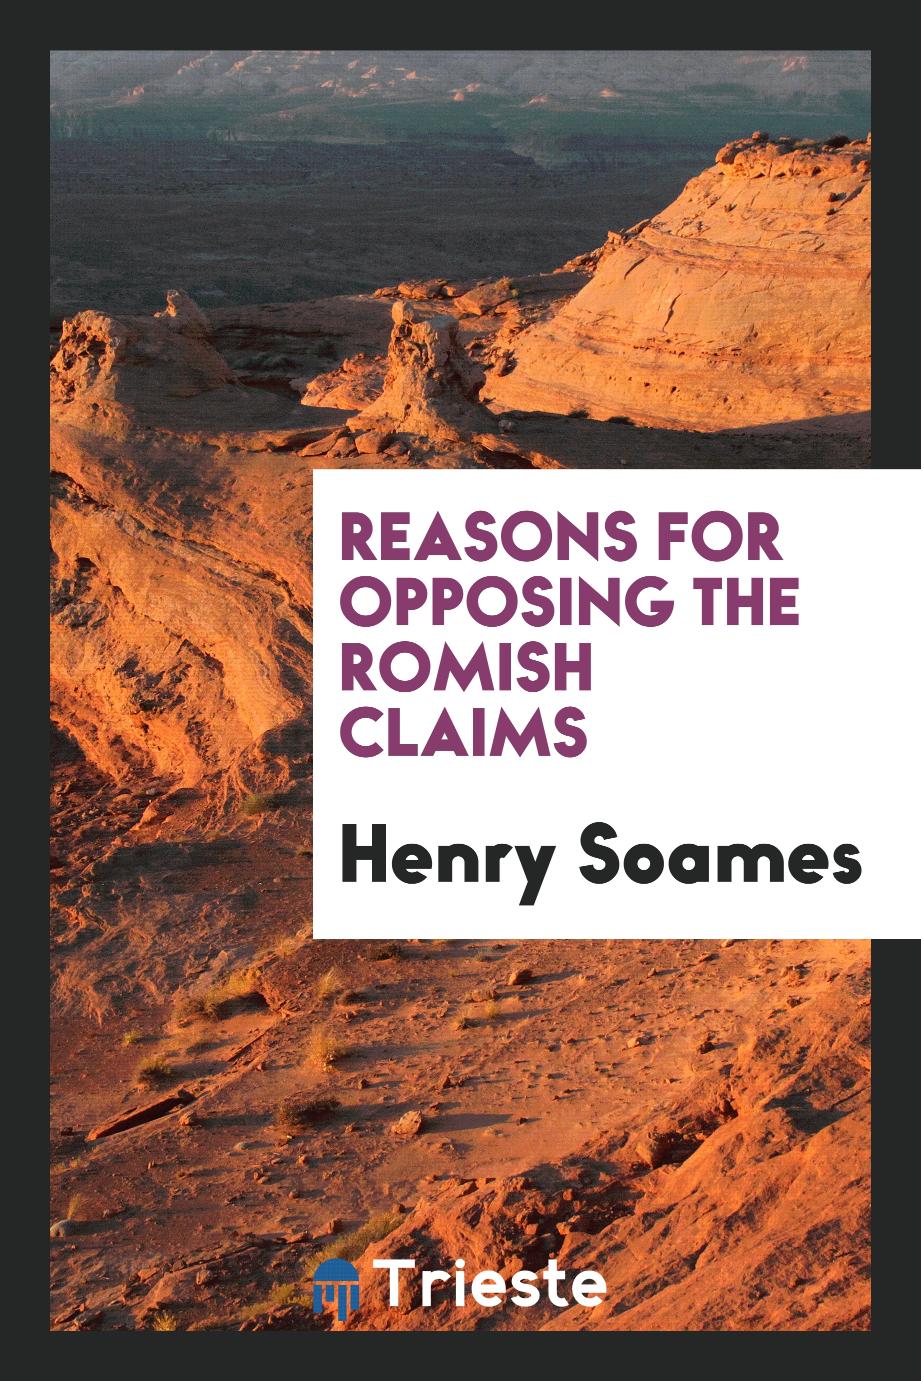 Reasons for opposing the Romish claims